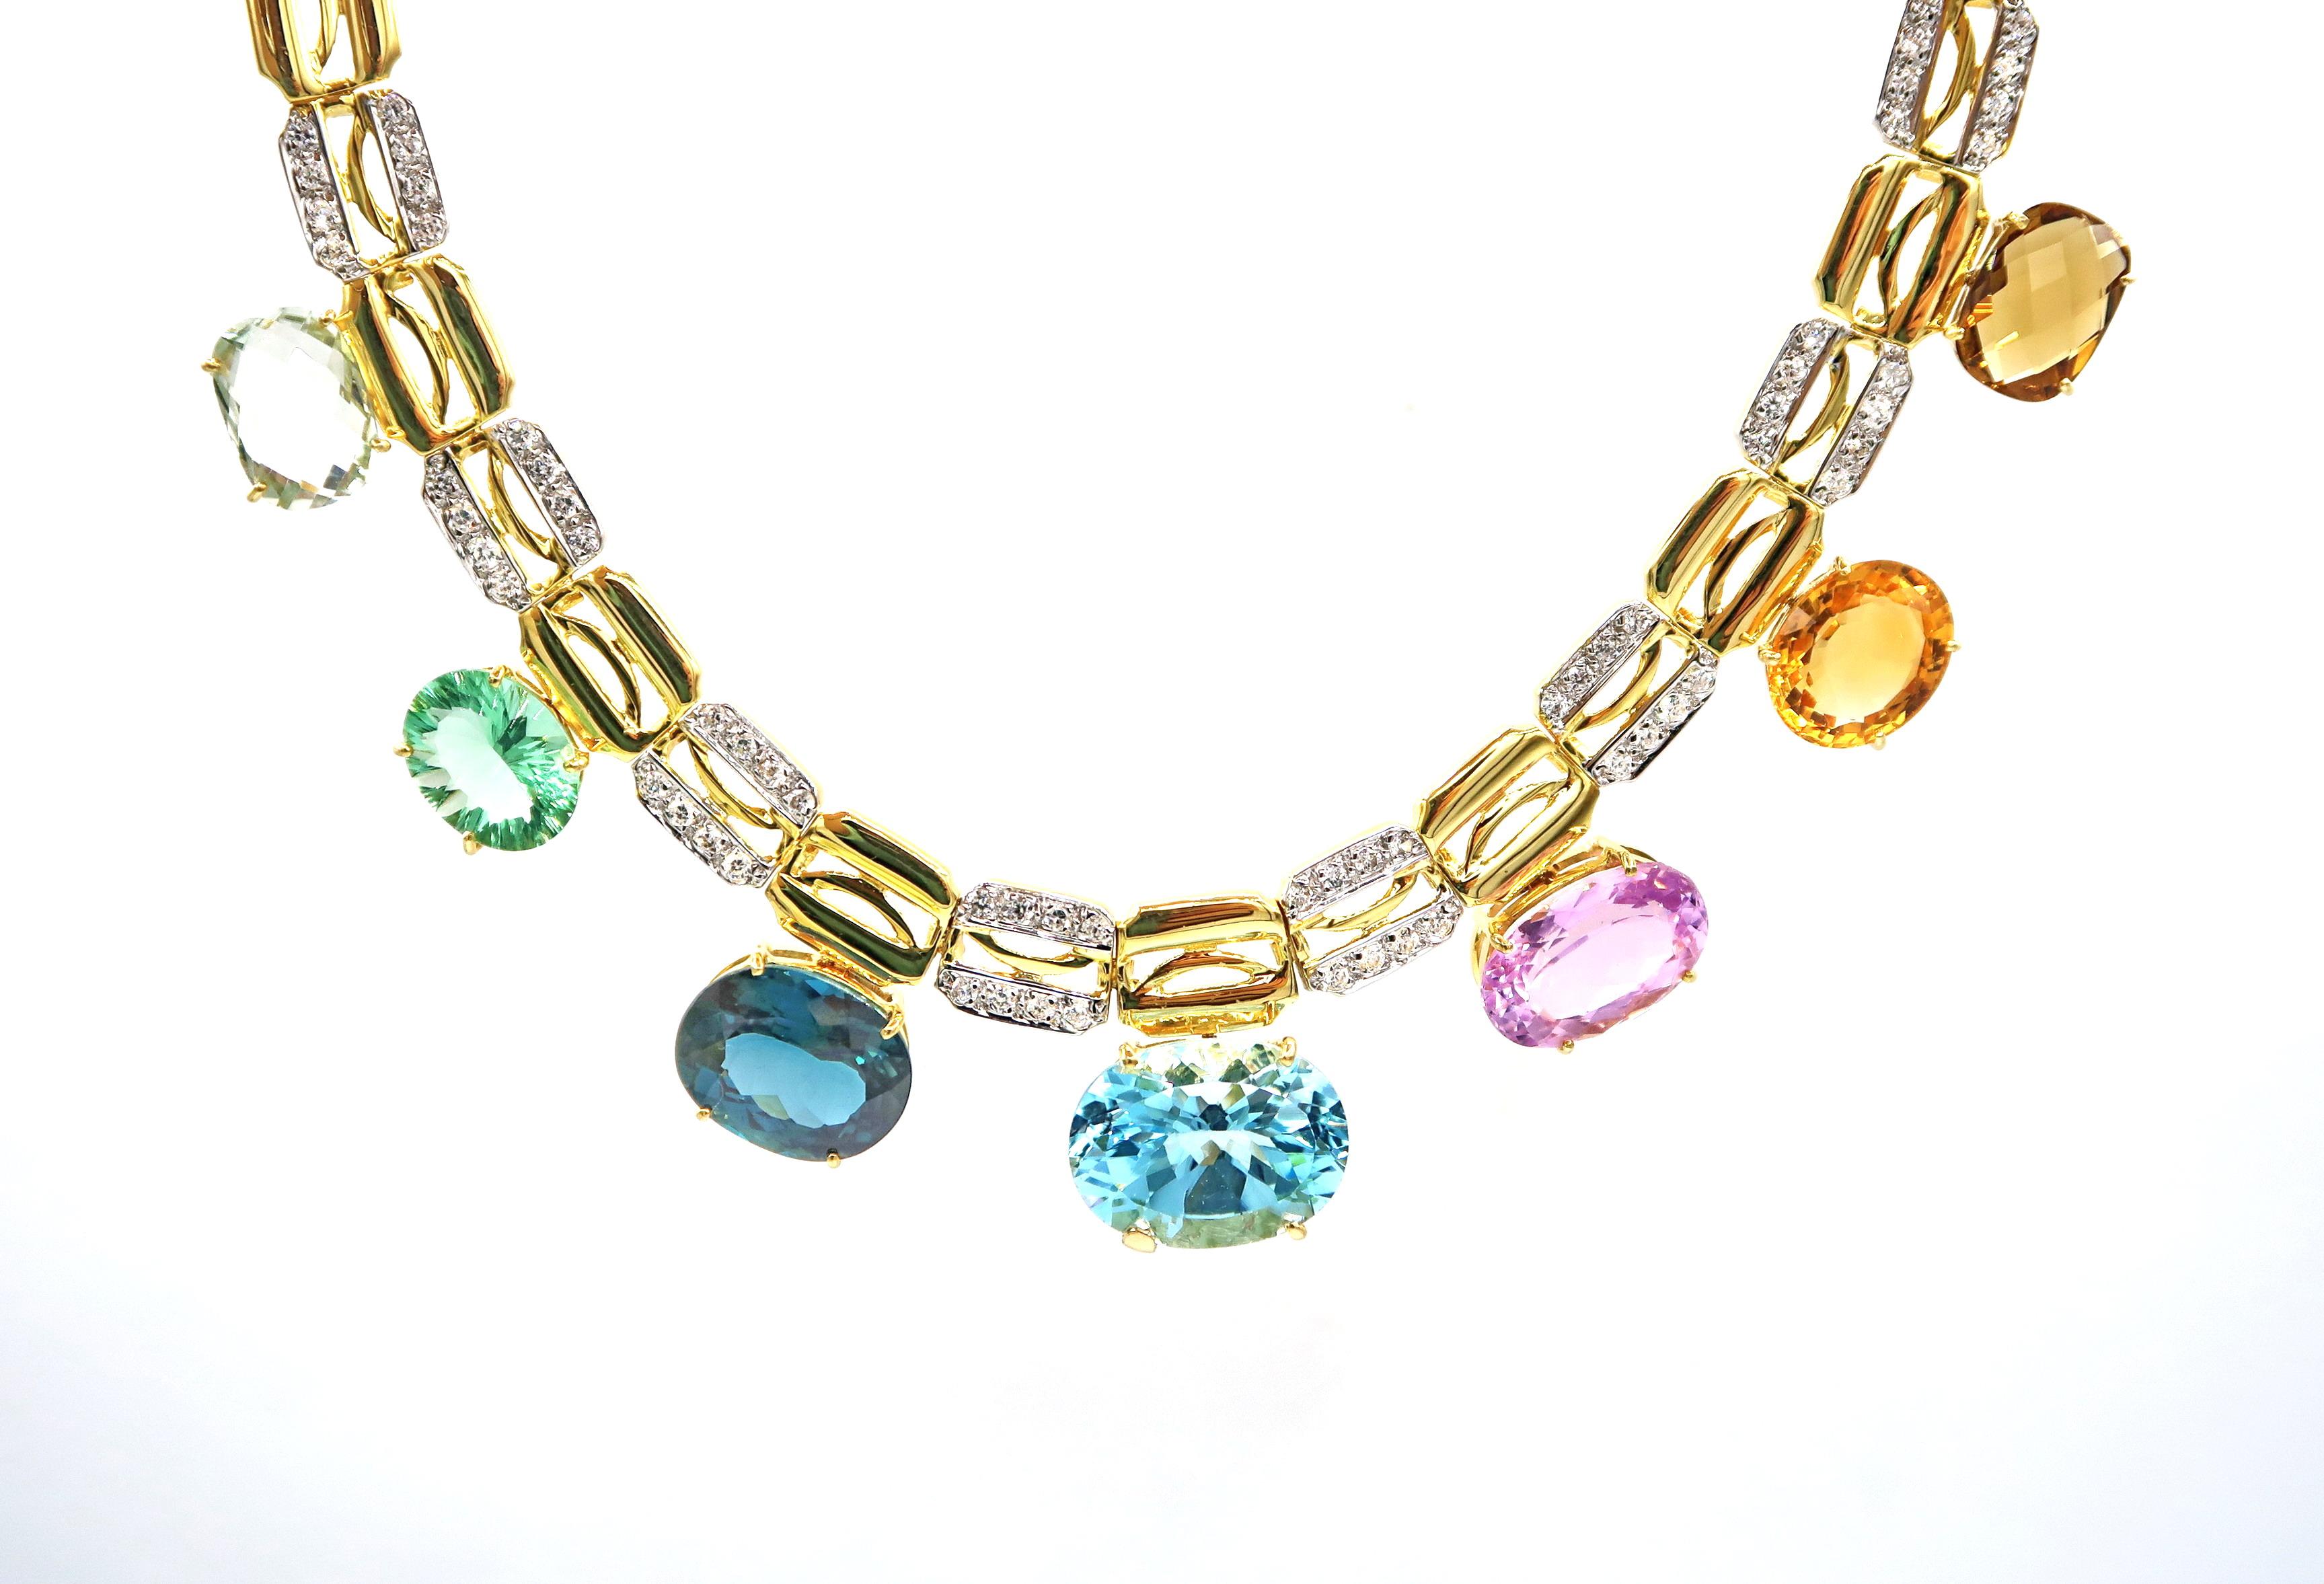 78.51 Carat Multicolour Semi Precious Gemstone 18K Yellow Gold Necklace embellished with White Zircon

Length : 16